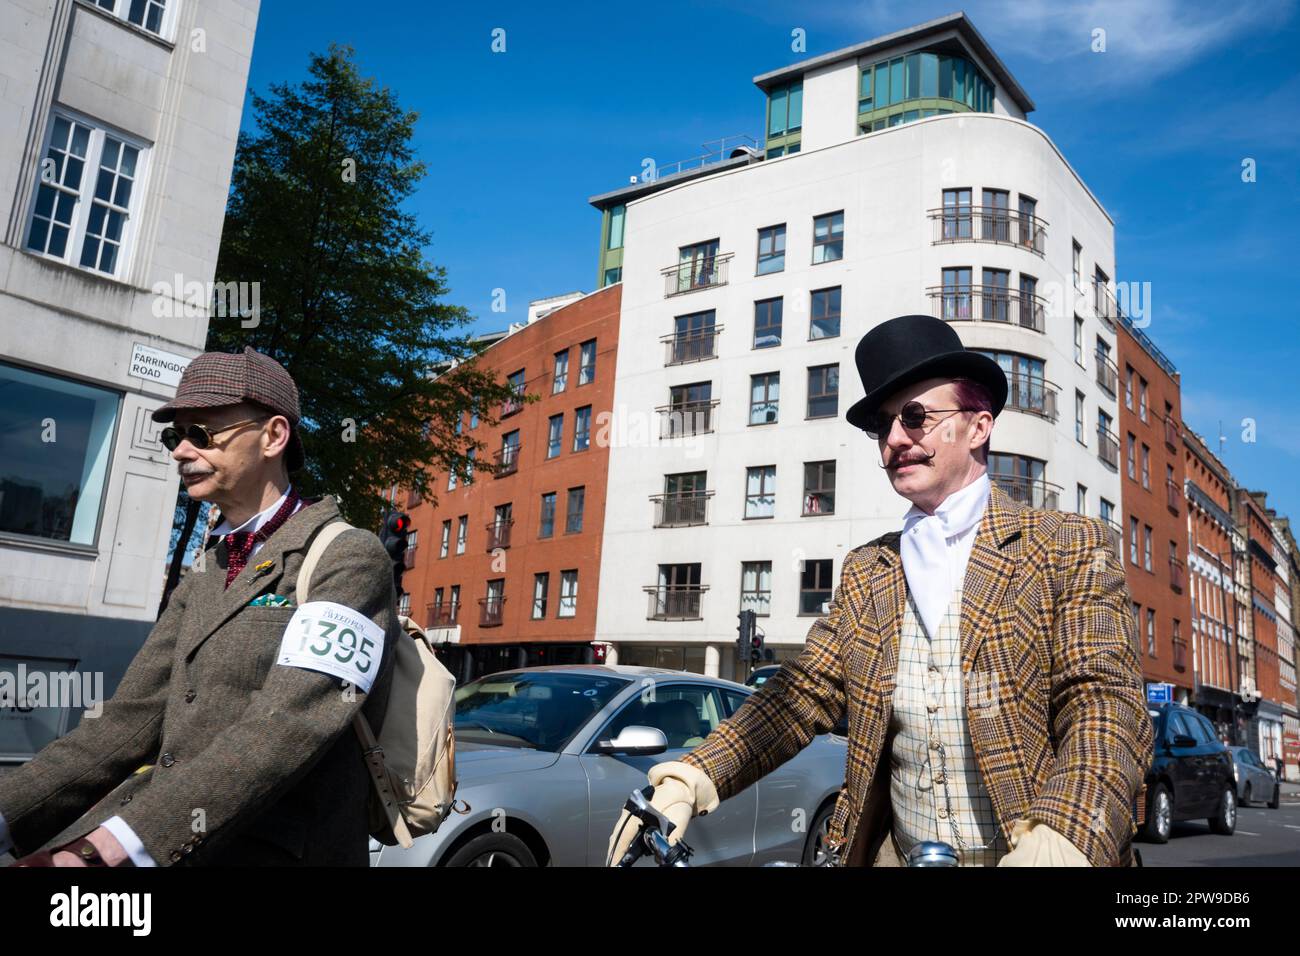 London, UK.  29 April 2023.  Stylish participants wearing their finest tweeds and brogues take part in the annual Tweed Run by riding bicycles around landmarks in central London, with stops for tea and a picnic en route.  The event has been held since 2009 appealing to the followers of fashion and cycling enthusiasts around the world.  Credit: Stephen Chung / Alamy Live News Stock Photo